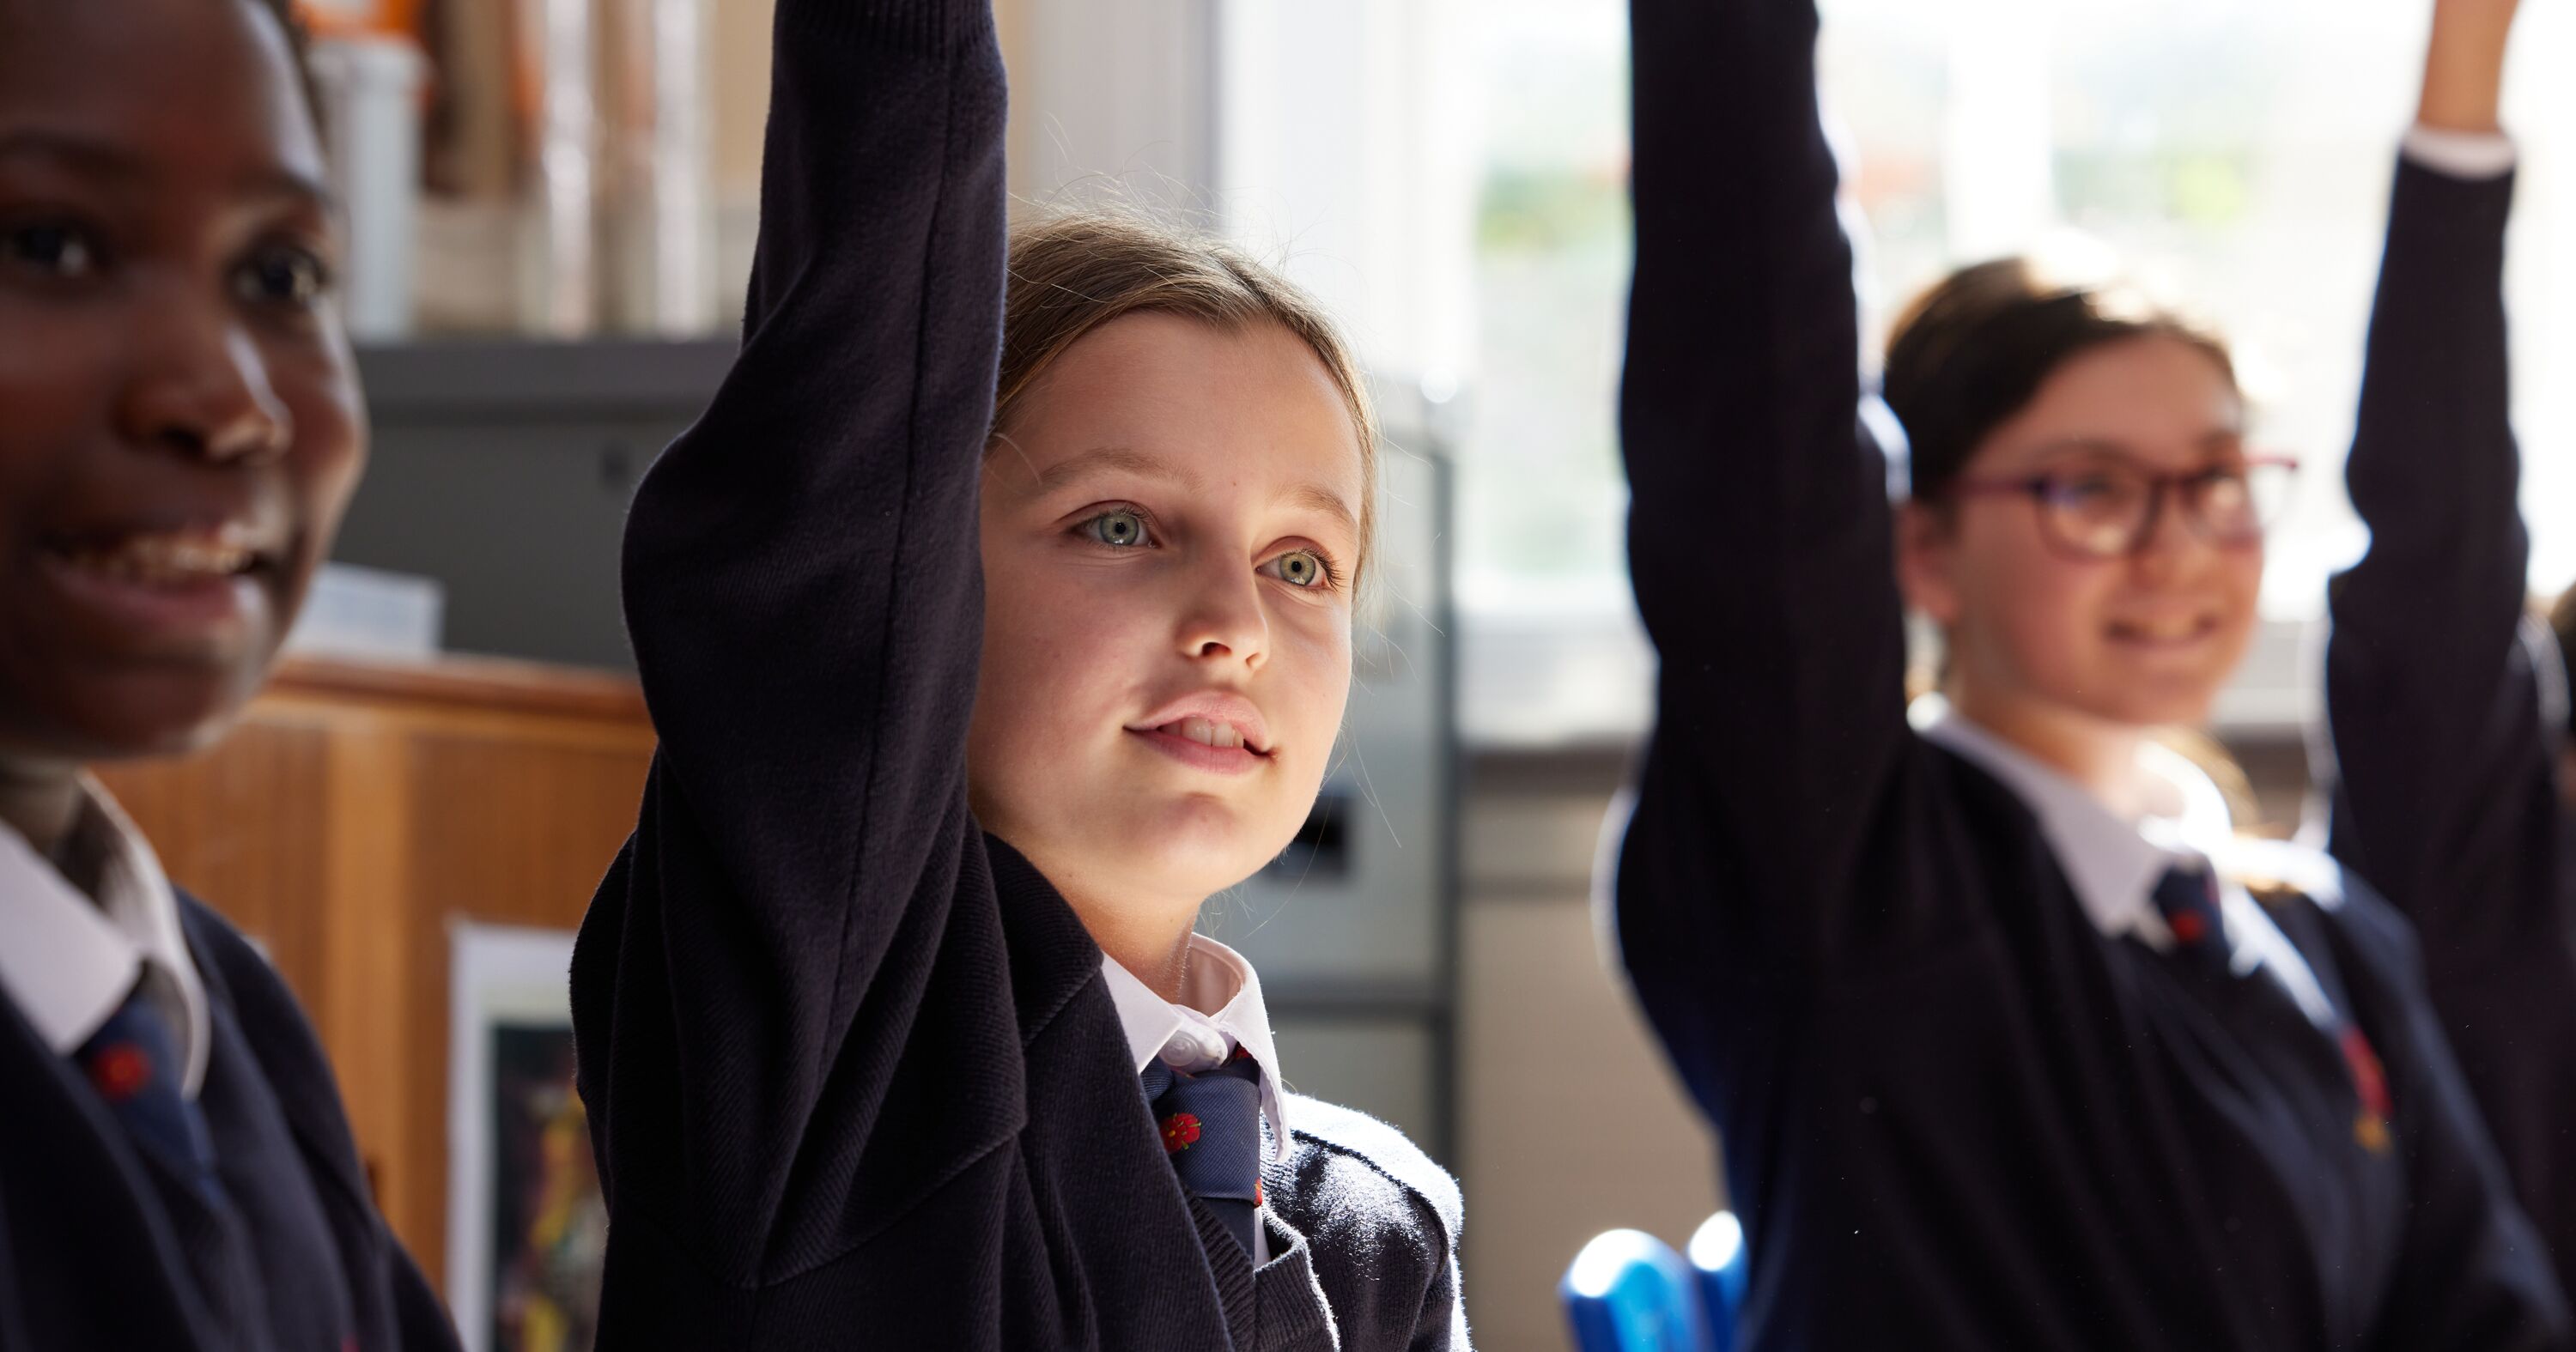 Students with arms raised in answer to a question